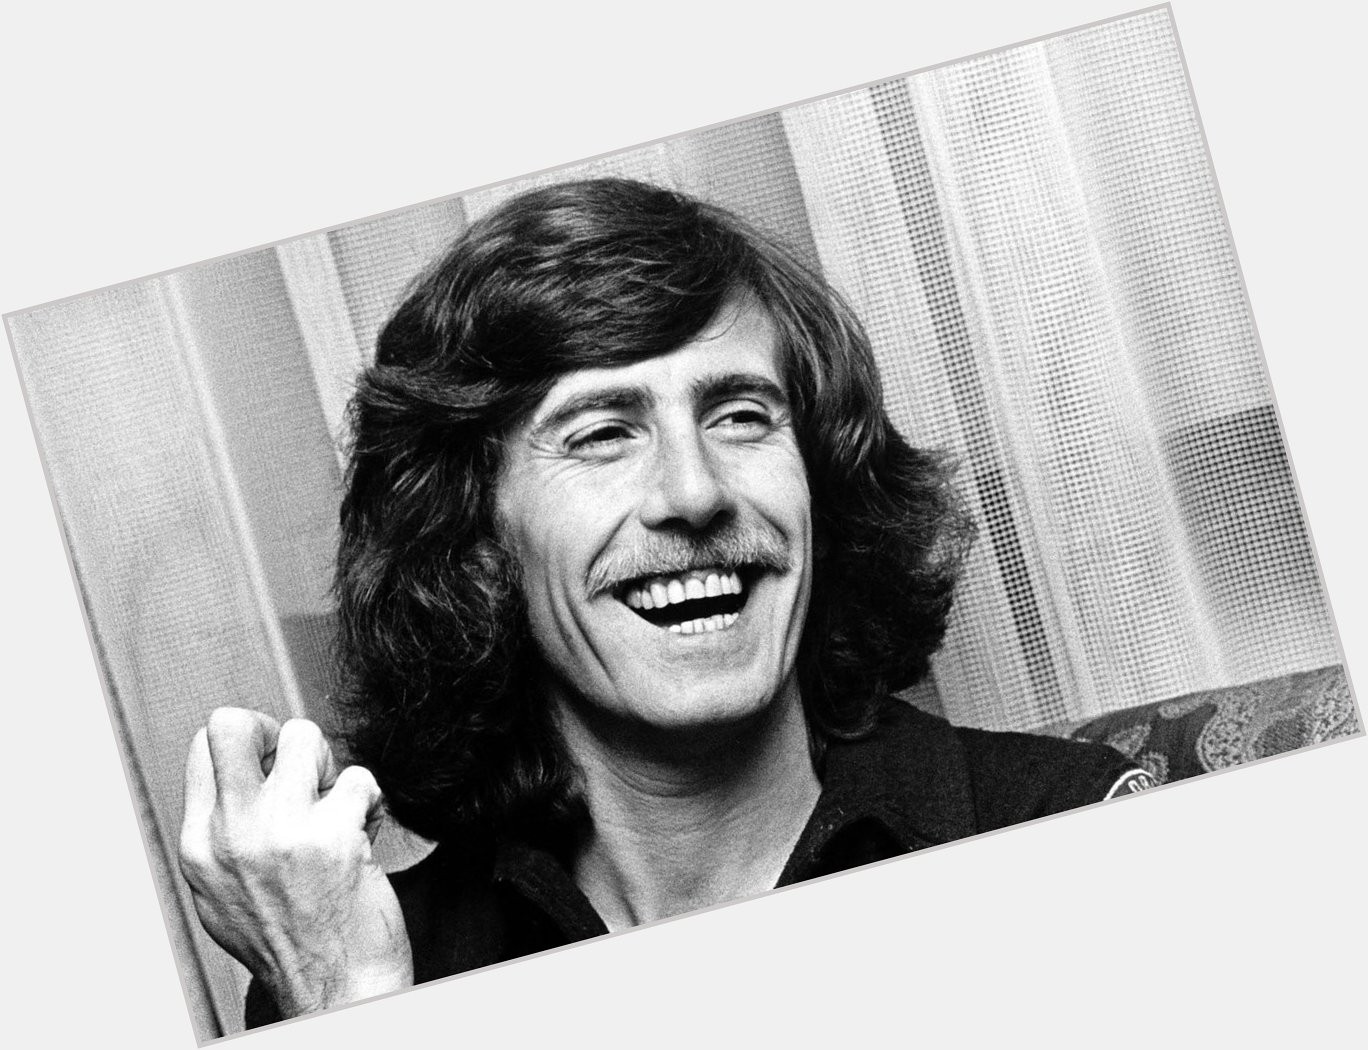 Happy Birthday to Graham Nash - guitarist, singer w The Hollies til 68 then He turns 73 today 